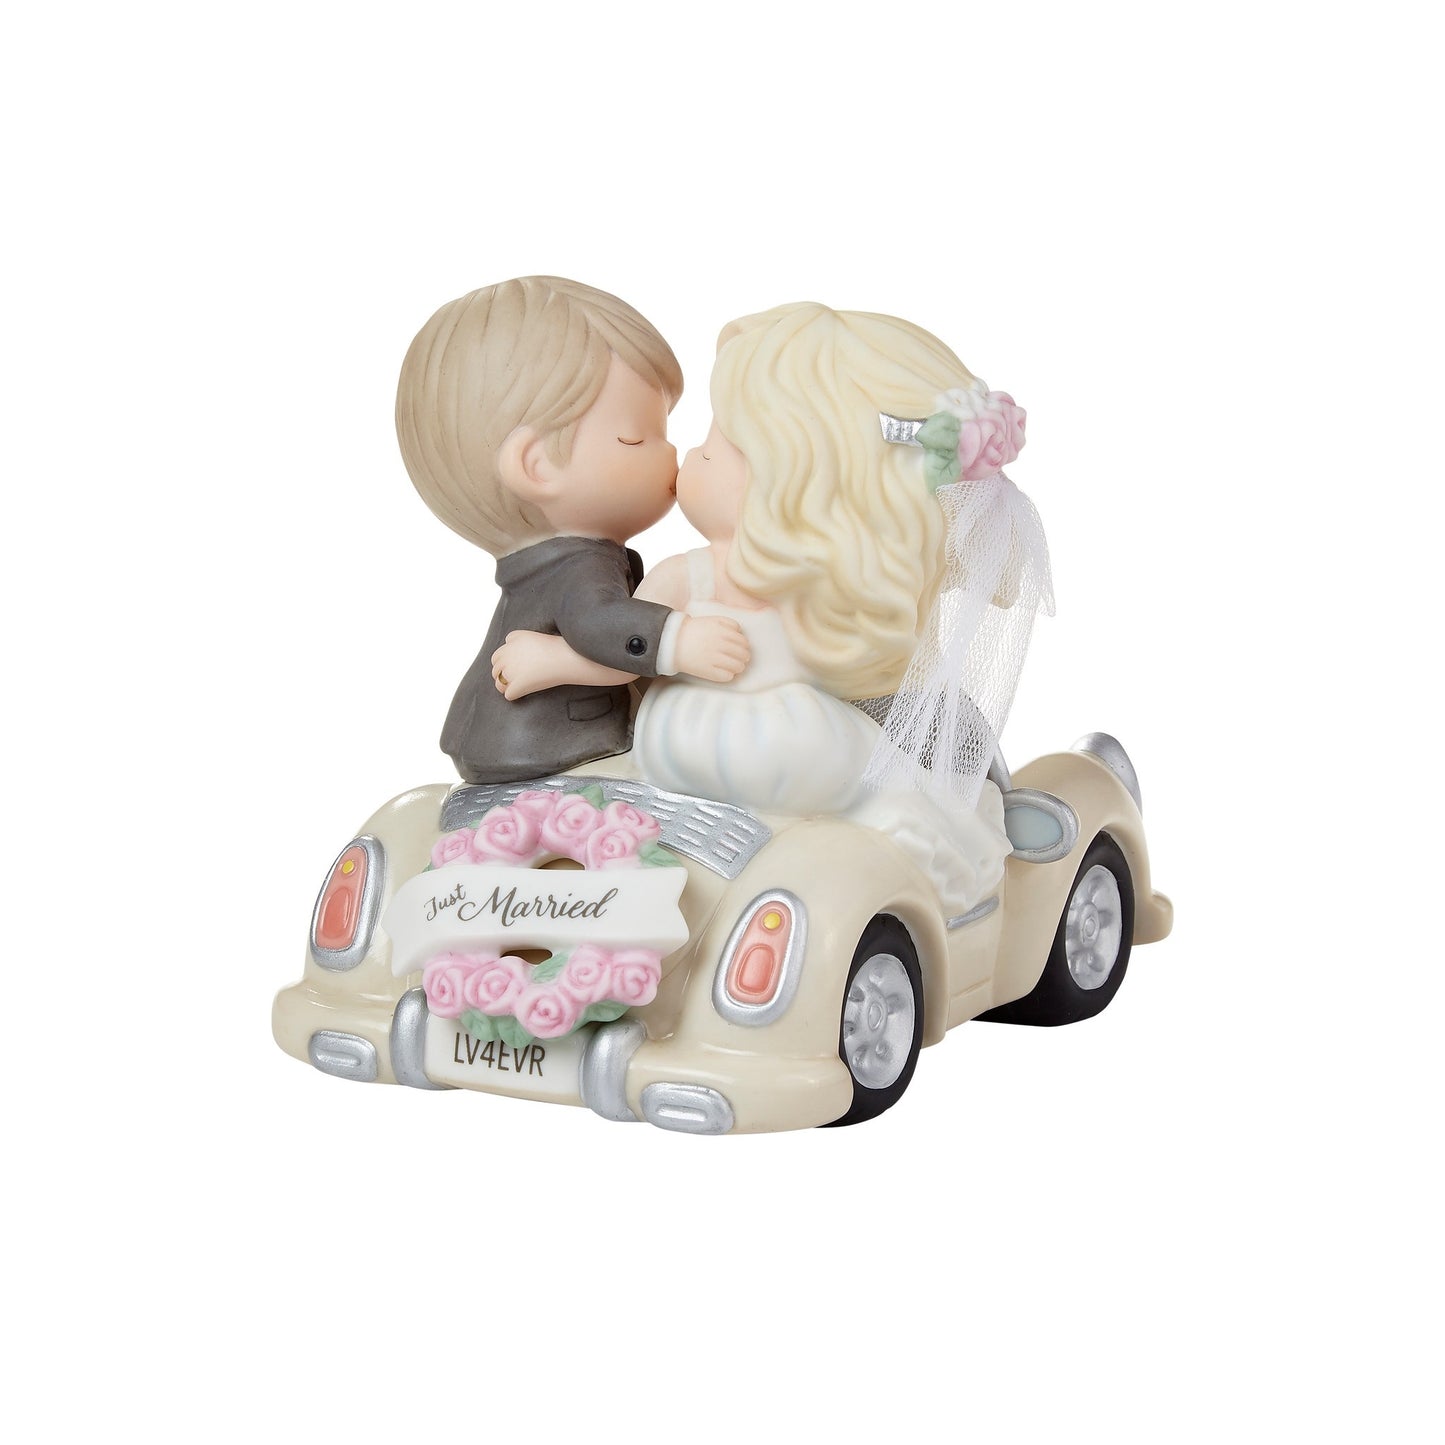 Precious Moments "On The Road To Forever" Wedding Figurine